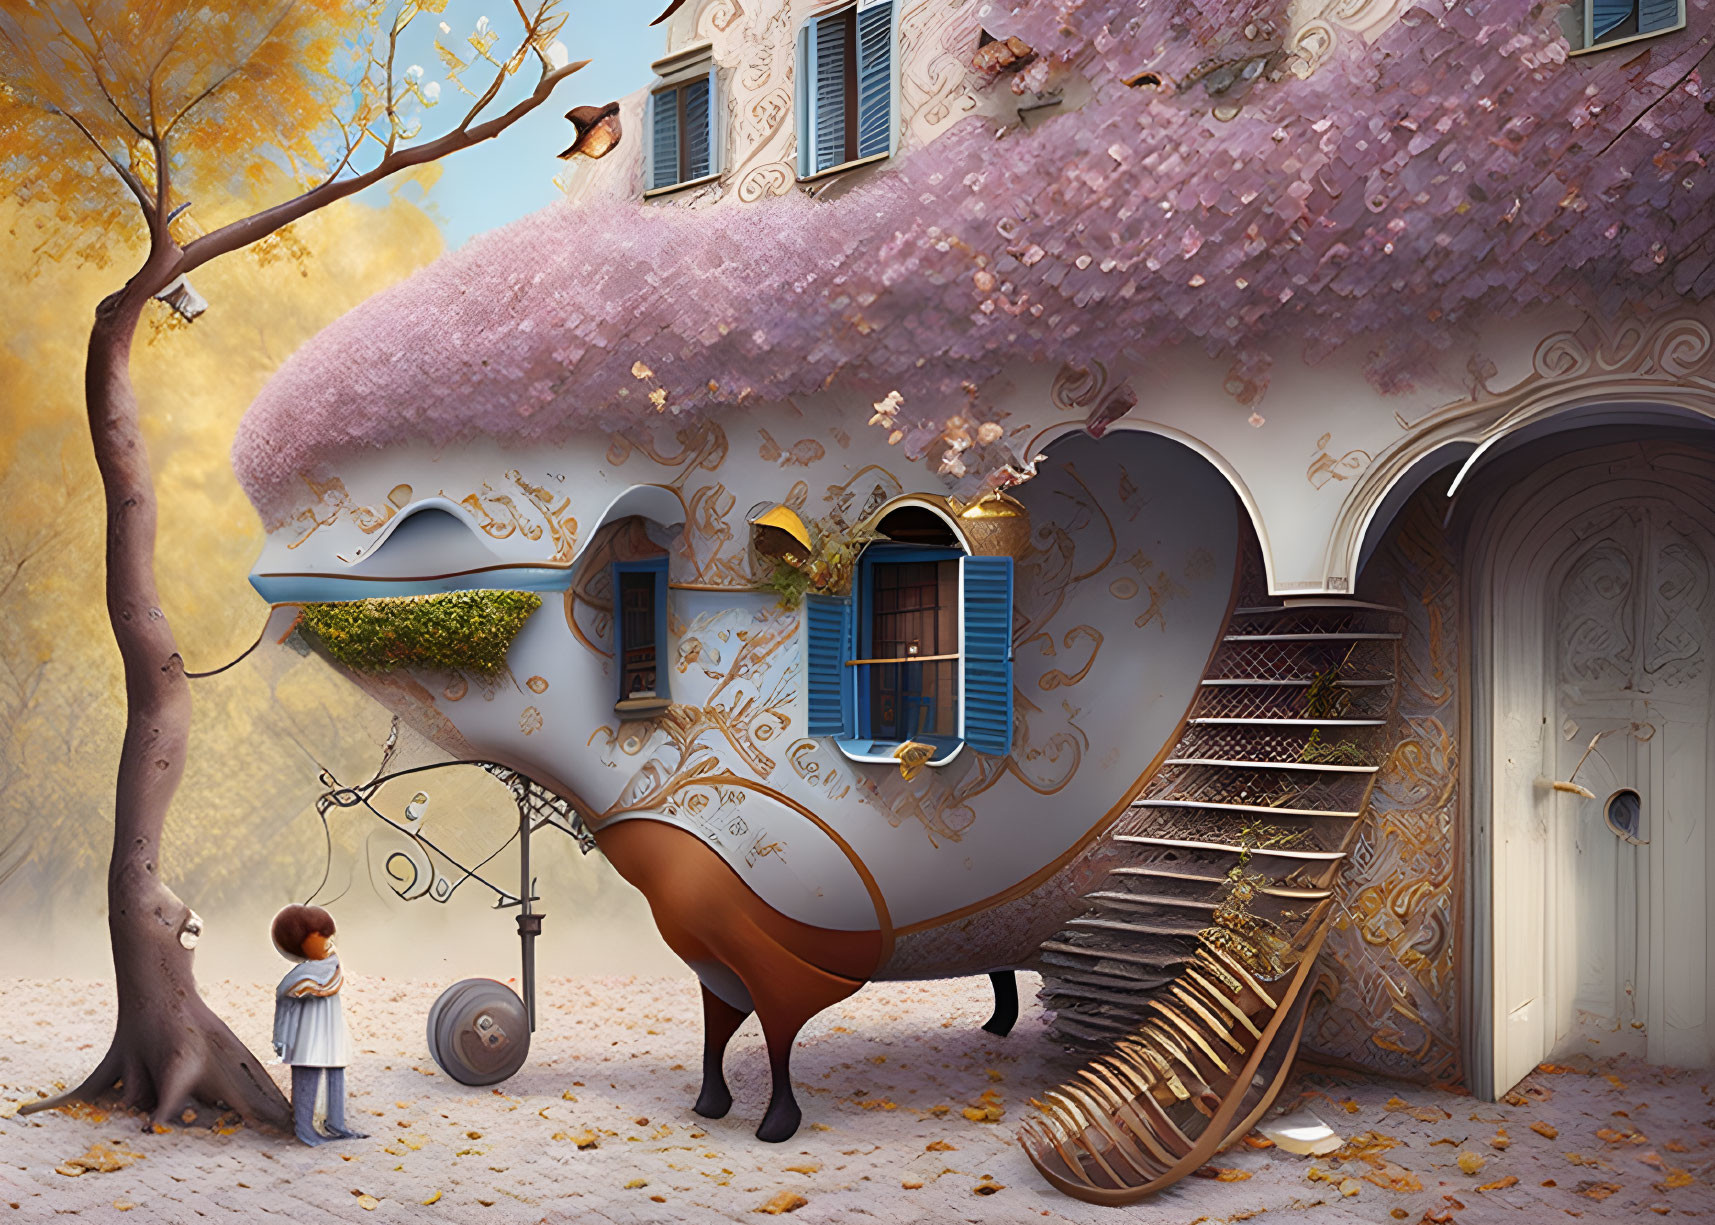 Child gazing at fantasy house on wheels with snail shell and classical building elements